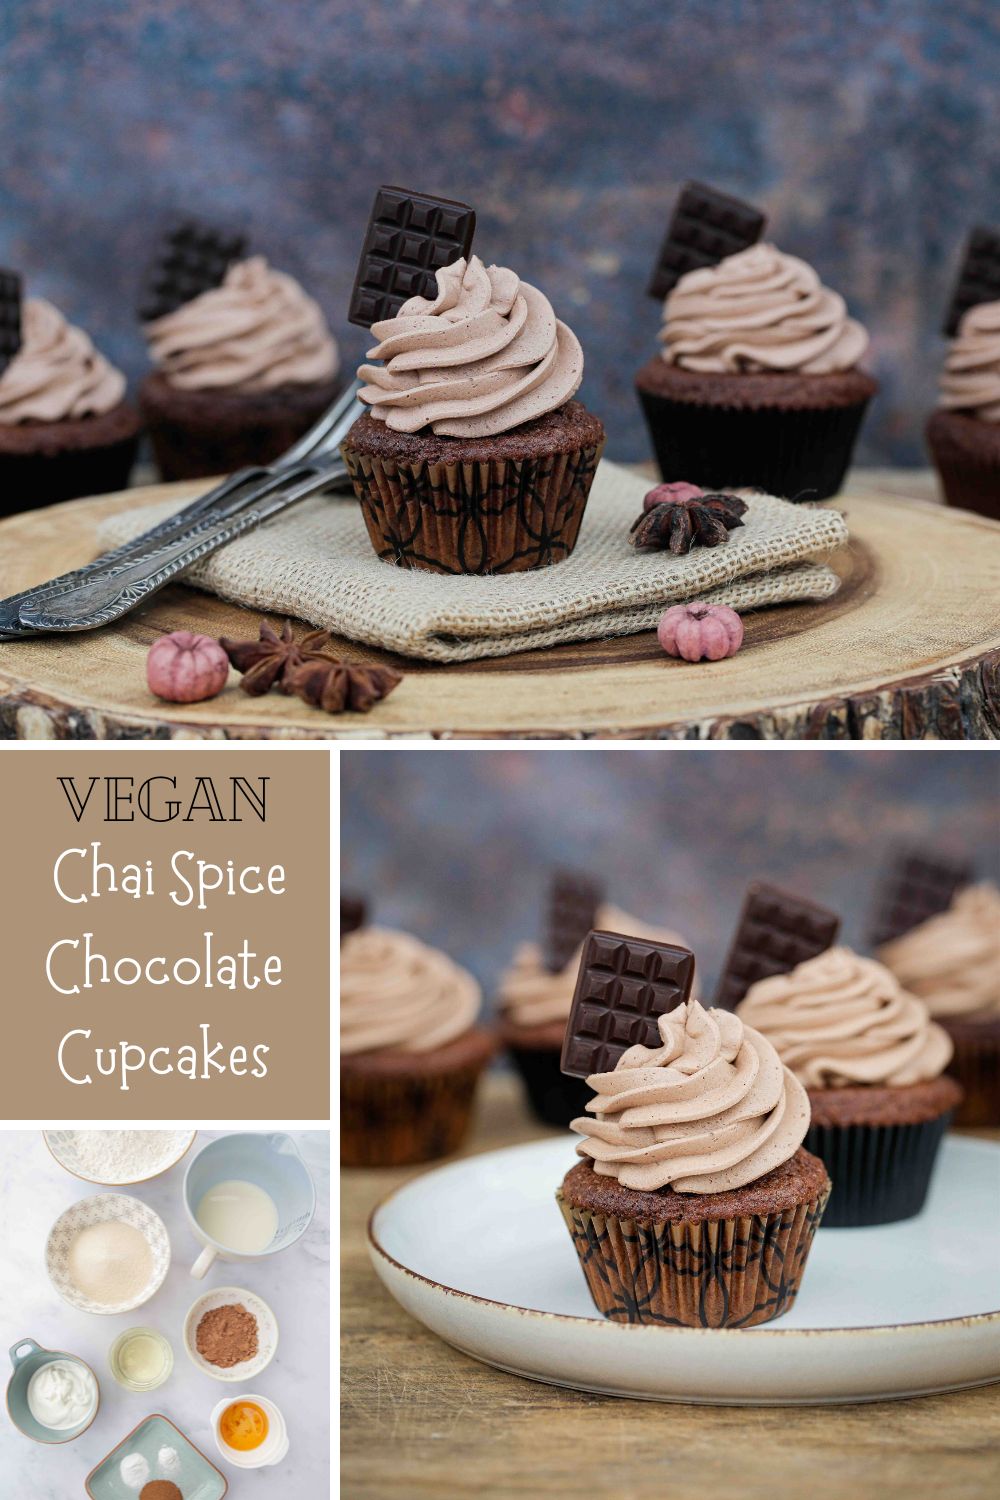 Warming chai spices are blended into these vegan chocolate cupcakes. Top with a fluffy chocolate buttercream for a delightful afternoon treat! Recipe on thecookandhim.com #vegancupcakes #buttercream #chaispice #chailatte #chocolatecupcakes